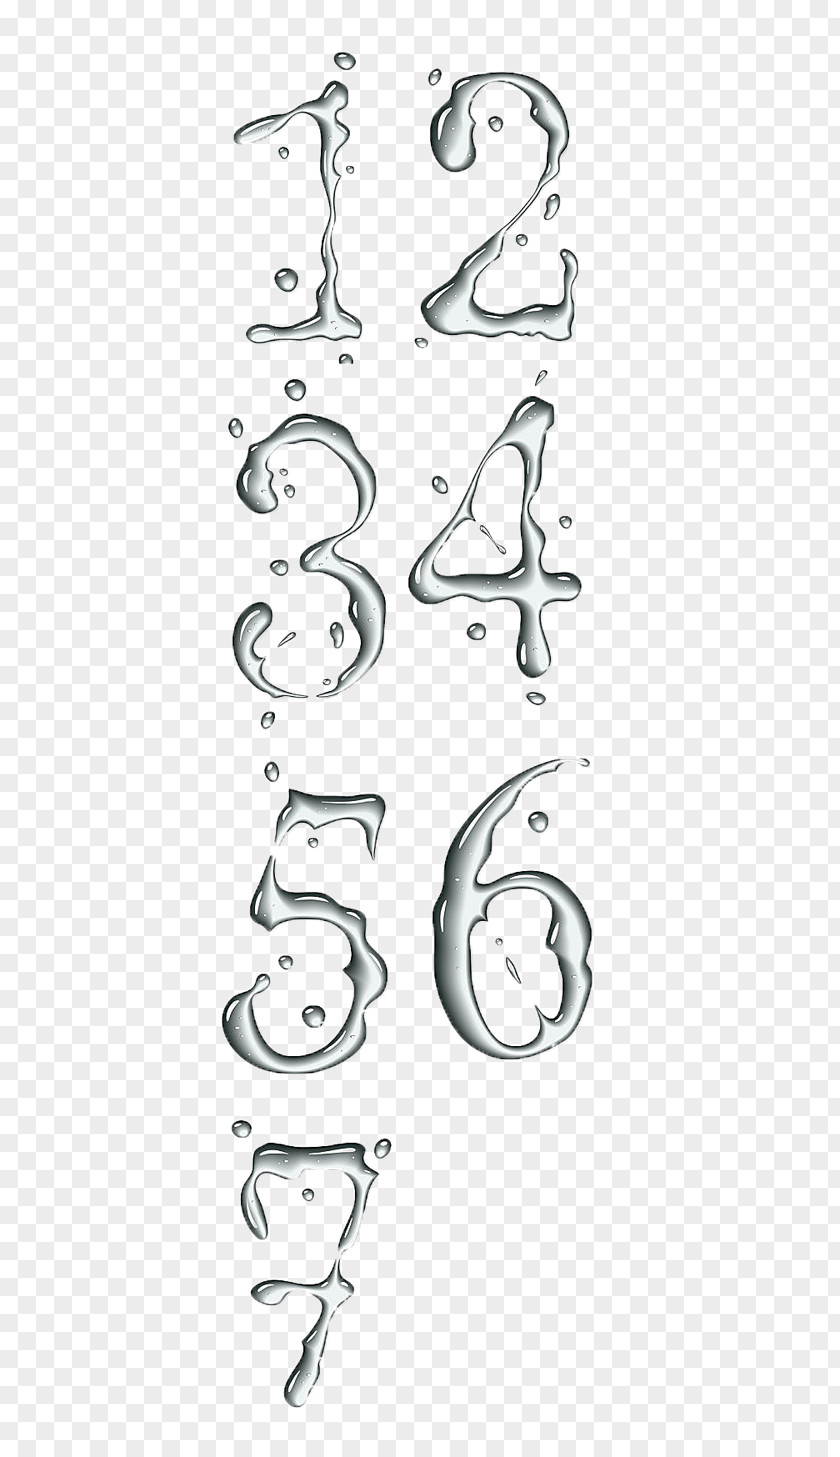 Water Droplets 1234567 Numerical Digit Arabic Numerals Drop PNG